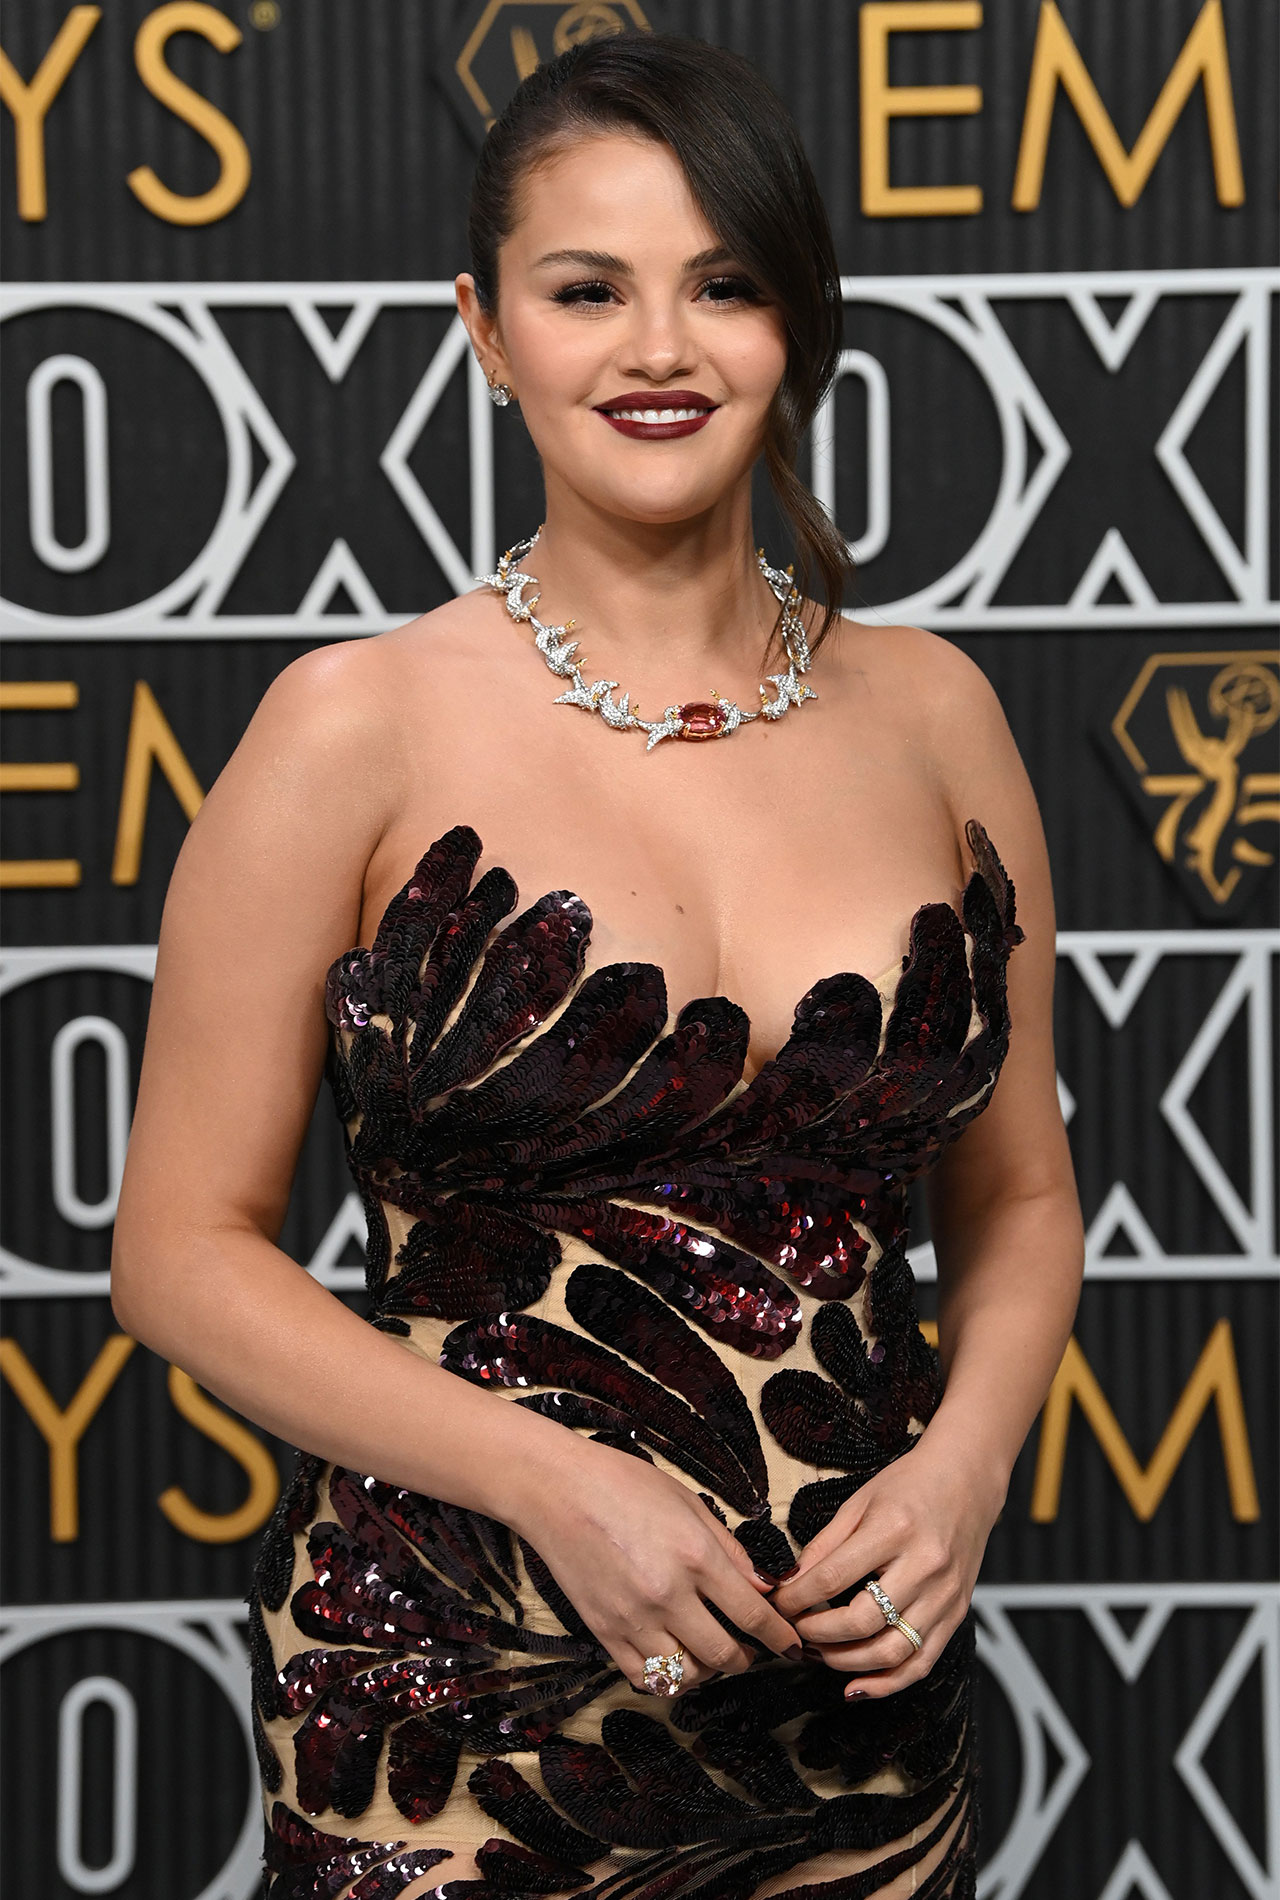 Selena Gomez Put It All On Display At The Emmys In A Low Cut Sequined